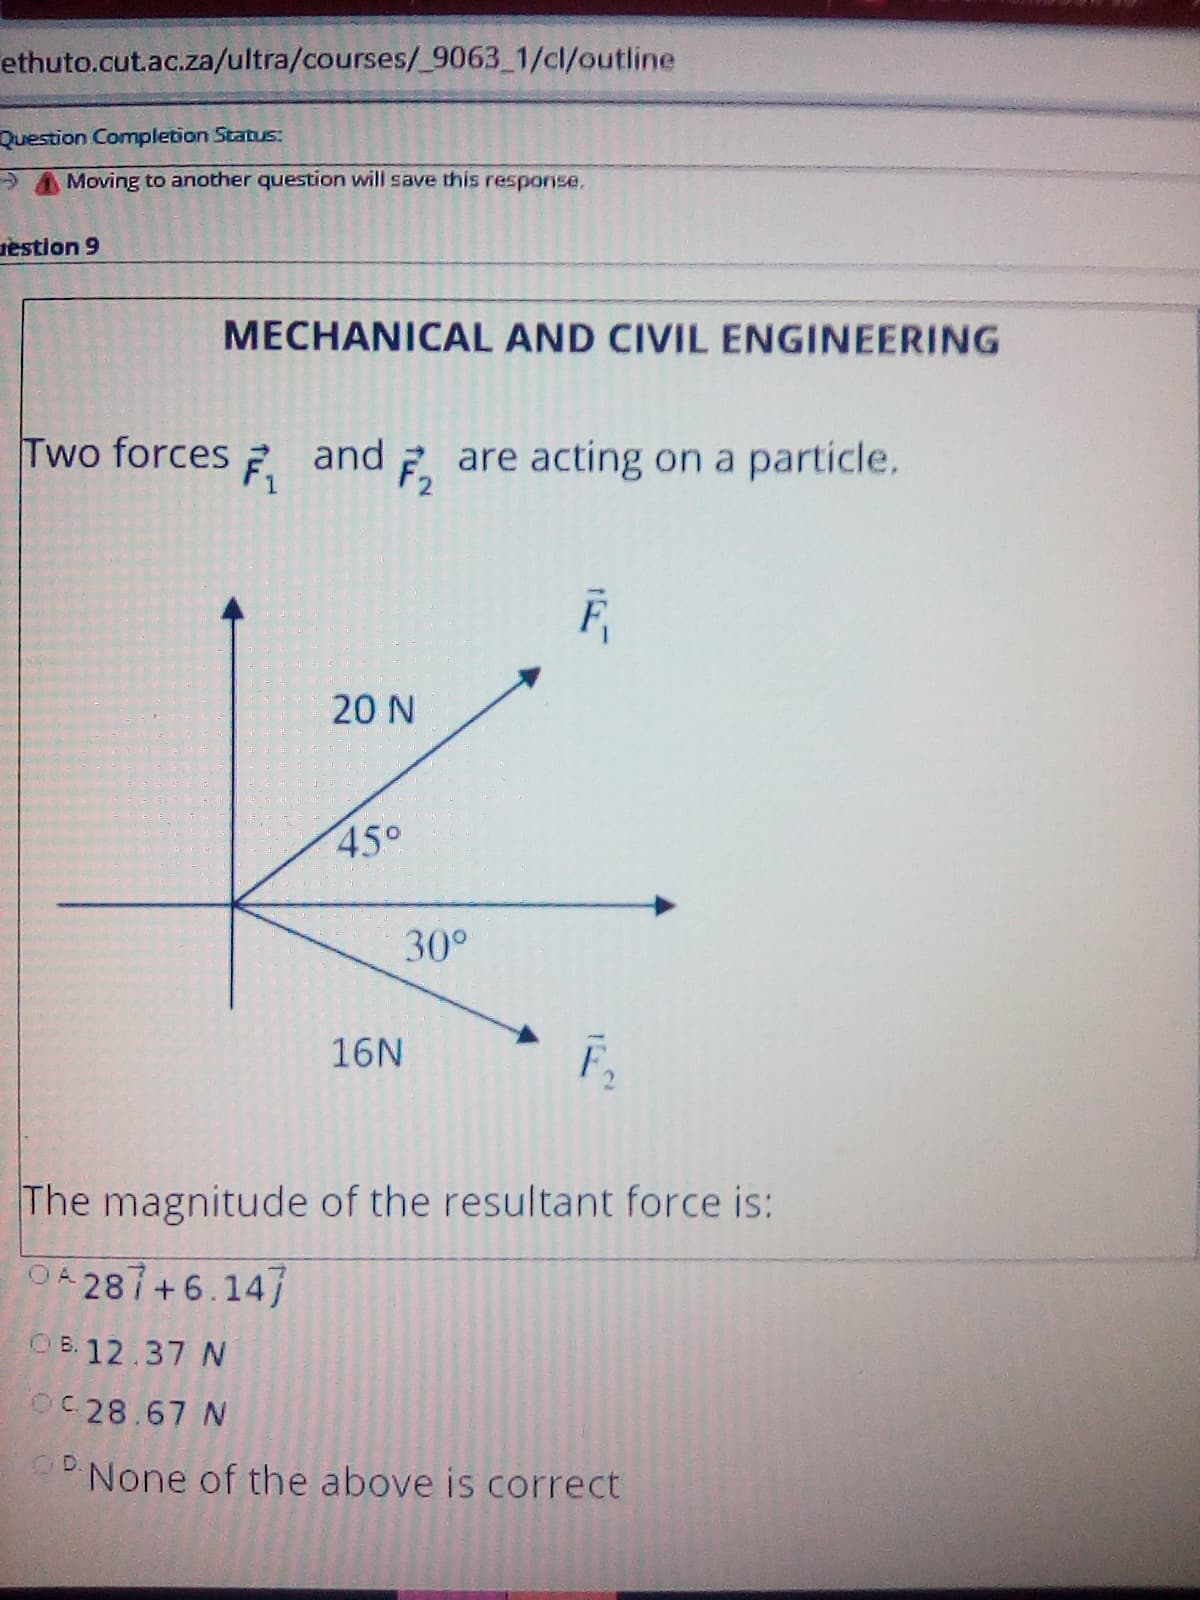 ethuto.cut.ac.za/ultra/courses/_9063_1/cl/outline
Question Completion Status:
Moving to another question will save this response.
gestion 9
MECHANICAL AND CIVIL ENGINEERING
Two forces
and 2 are acting on a particle.
20 N
45°
30°
16N
The magnitude of the resultant force is:
O4 287+6.147
O B. 12.37 N
OC 28.67 N
D.
None of the above is correct
